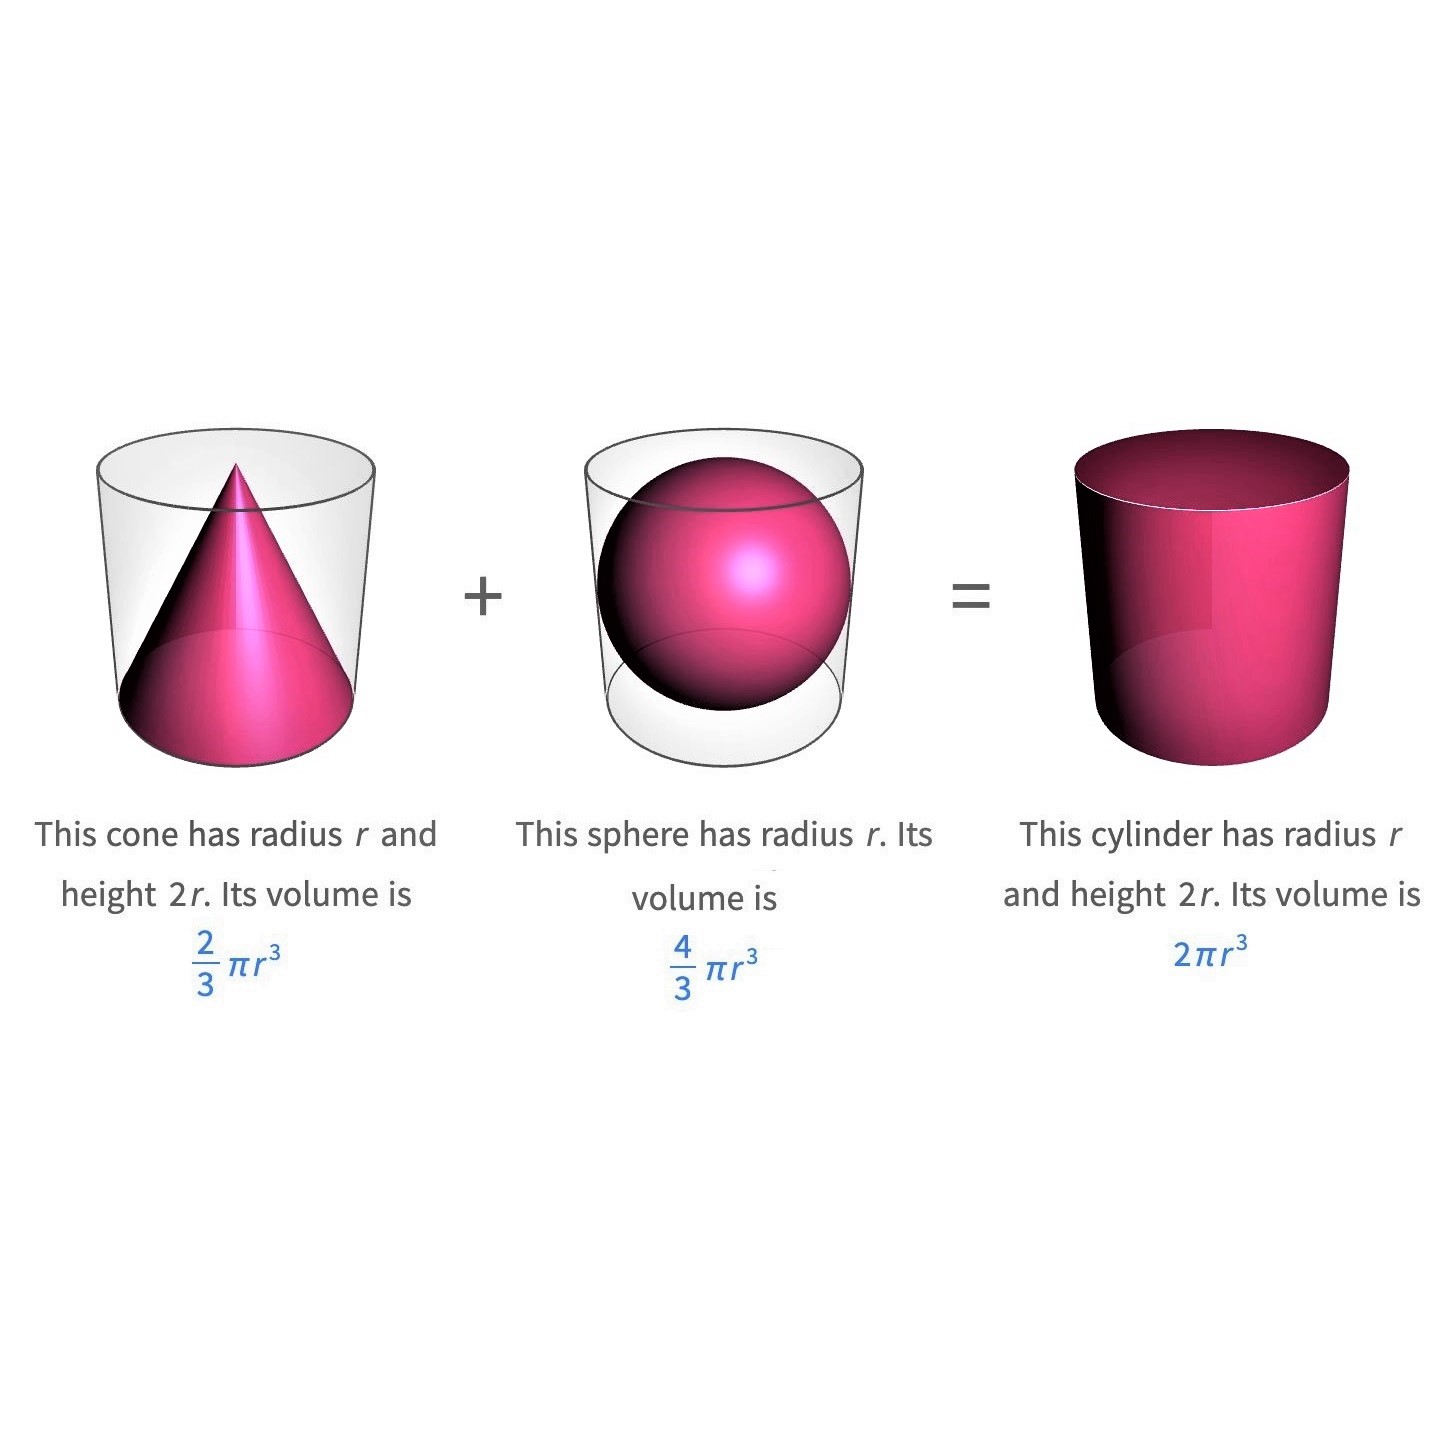 Archimedes discovered that if you add the volumes of a cone and a sphere, you get the volume of their bounding cylinder